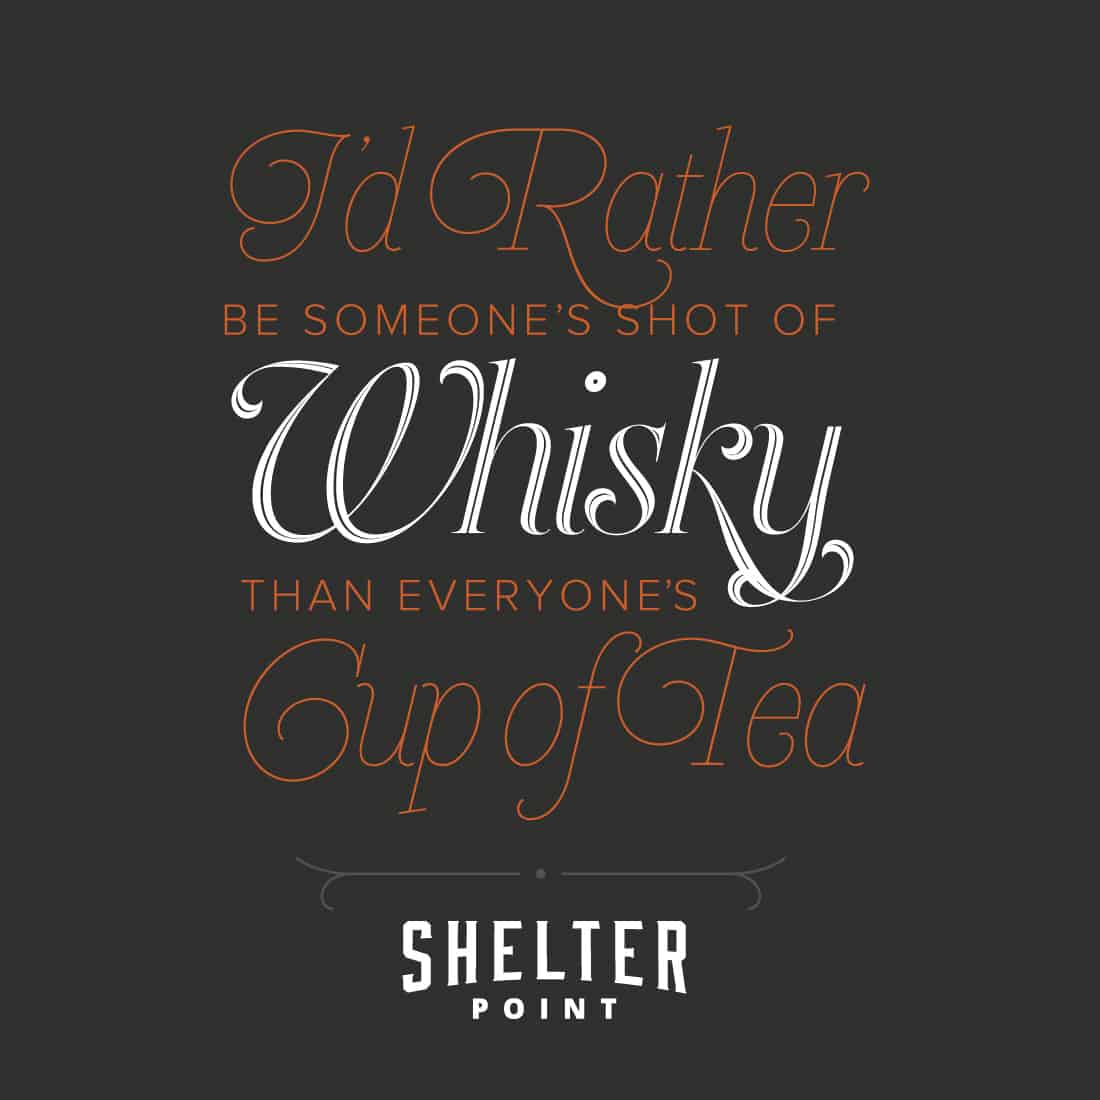 I'd rather be someone's shot of whisky than everyone's cup of tea